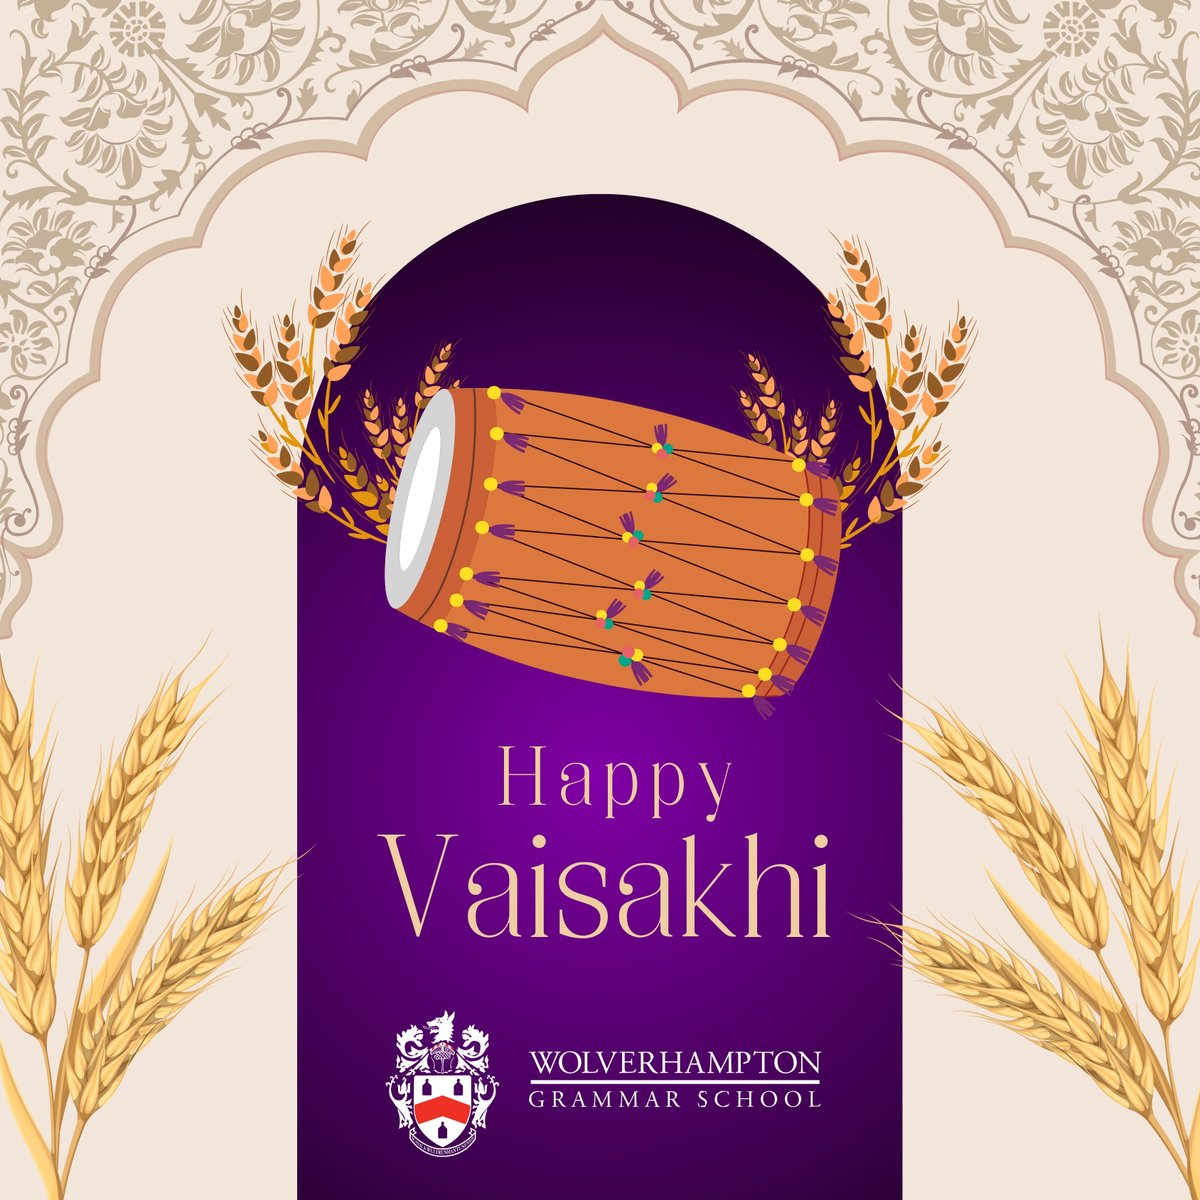 Happy Vaisakhi to our WGS community! 🌾 Today, we celebrate the Sikh New Year - a time of harvest, reflection, and new beginnings. May this Vaisakhi be filled with joy, delicious food and meaningful celebrations. #WeAreWGS #Vaisakhi #Wolverhampton